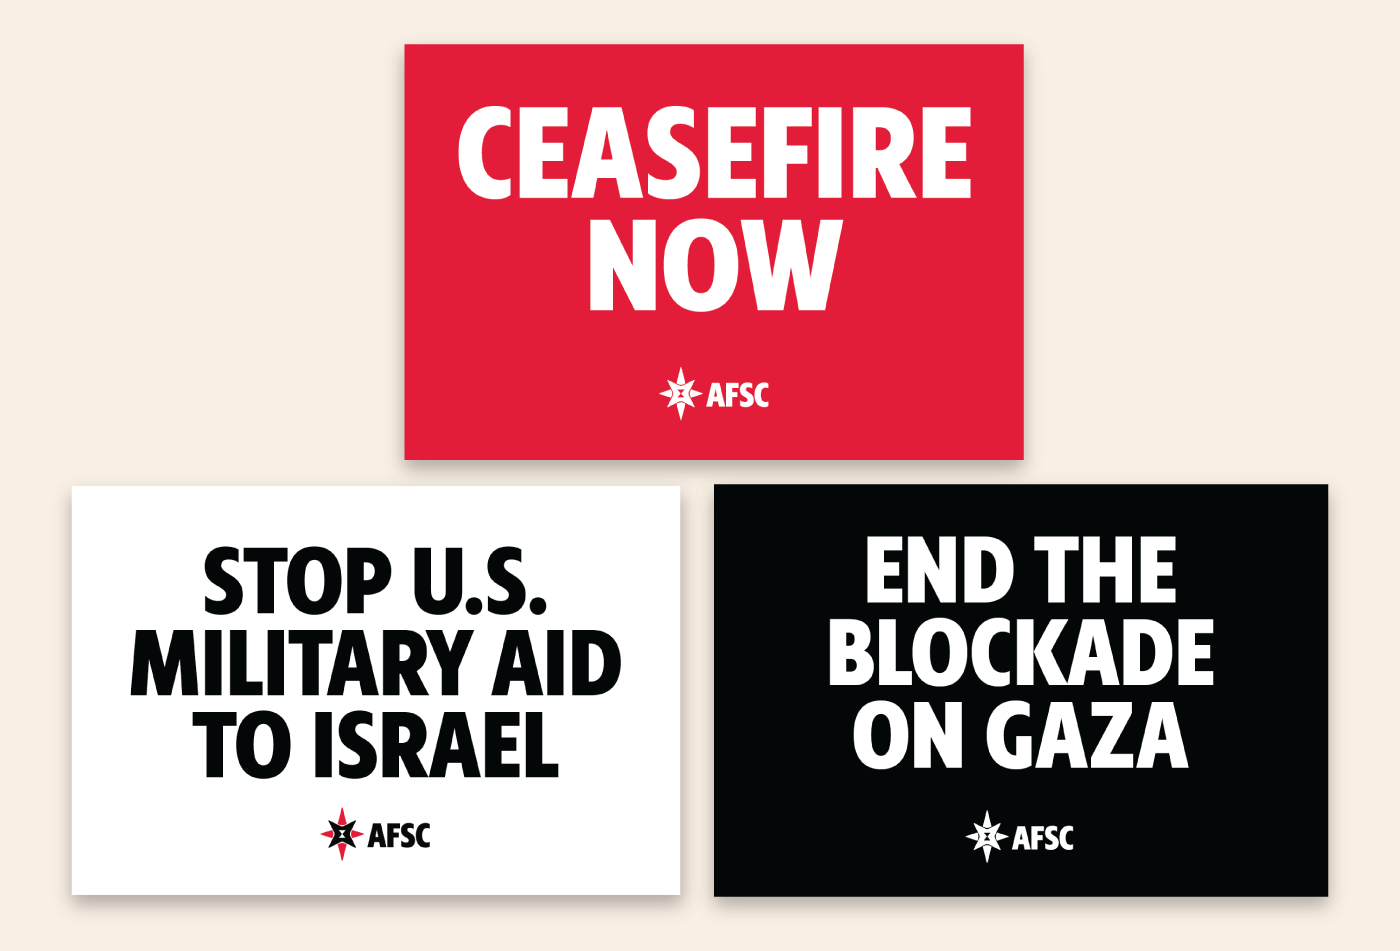 image of posters that say ceasefire now